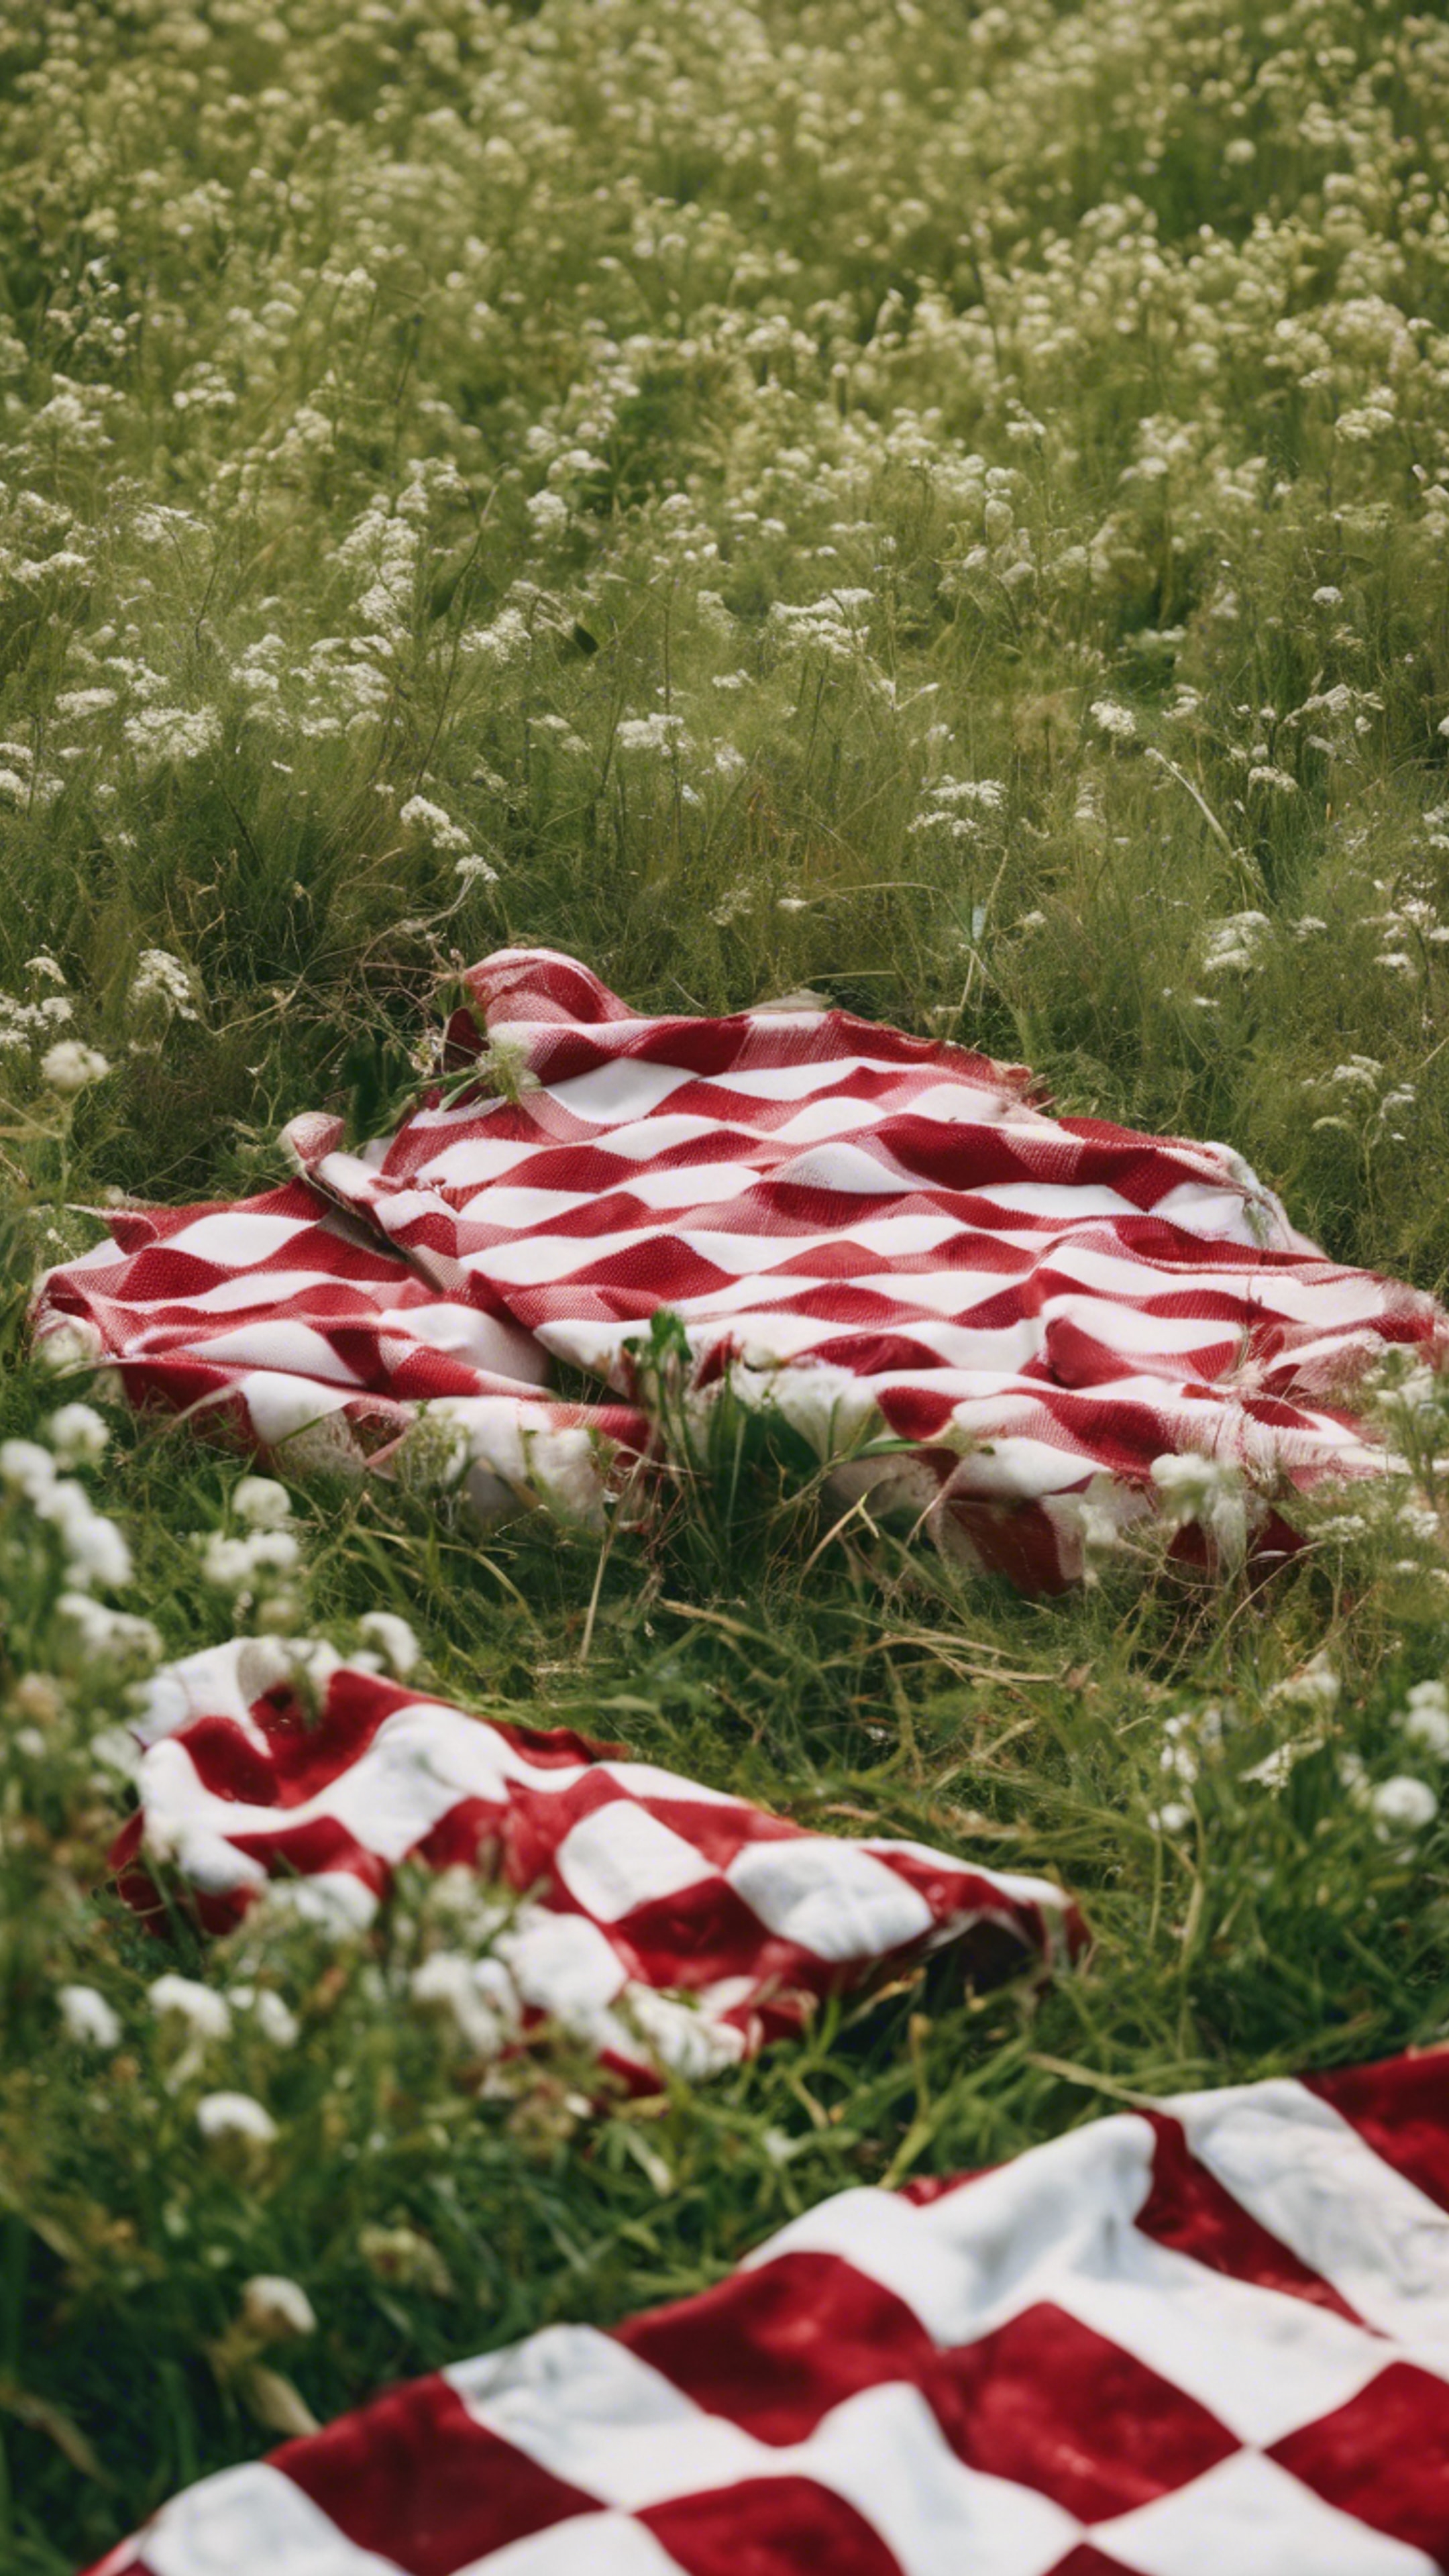 A red and white checkered picnic blanket spread out in a lush green field.壁紙[d3f97e971ed8445aa31d]